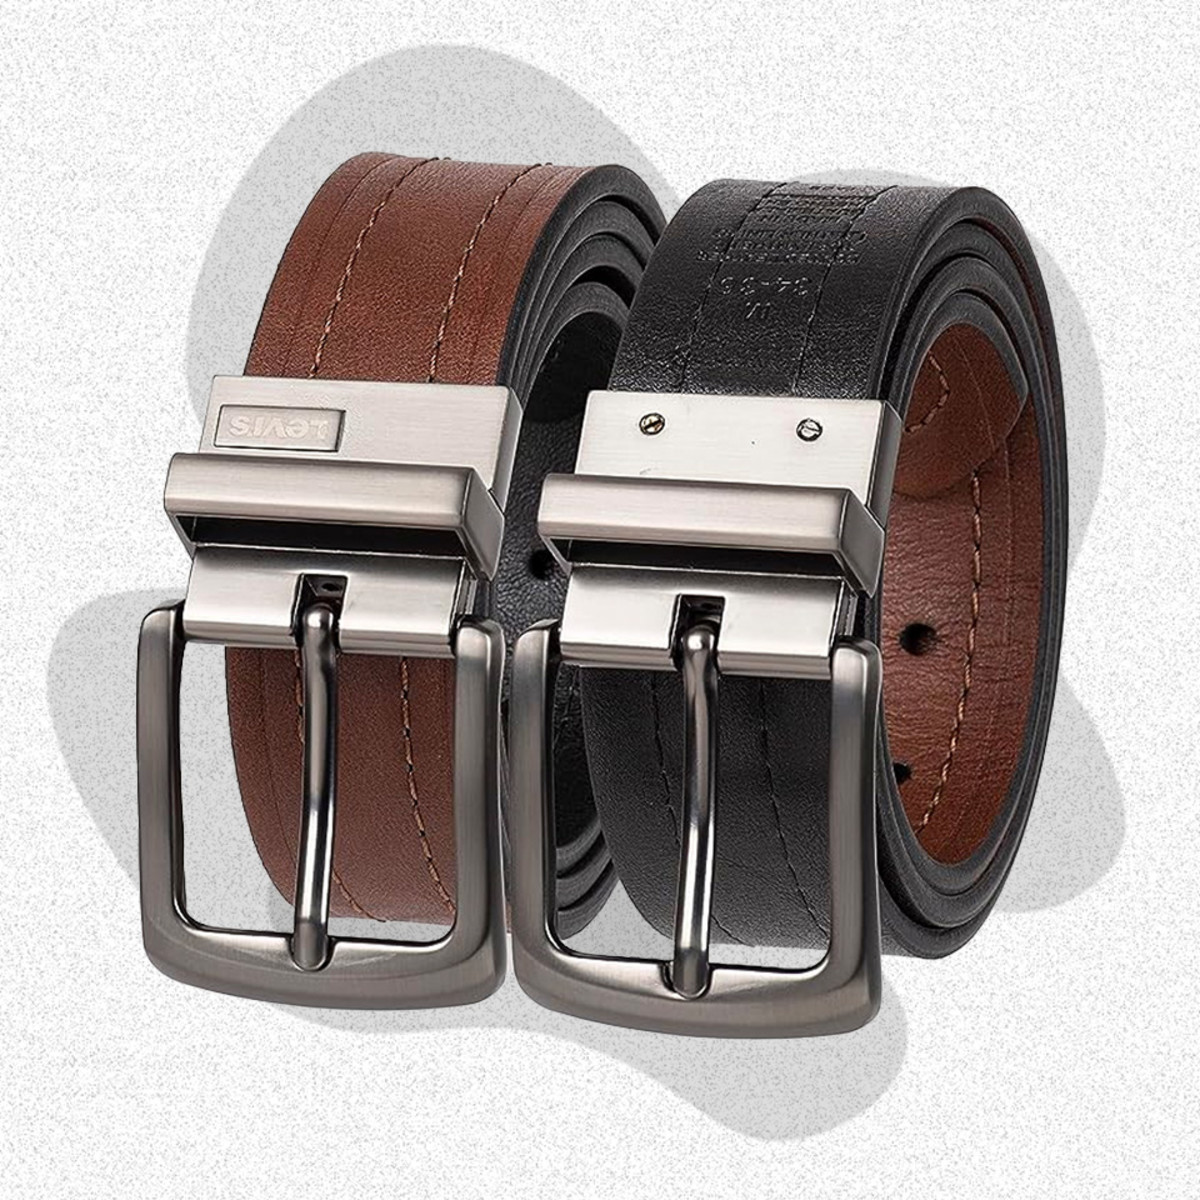 15 Best Men's Leather Belts For Any Occasion, Style and Budget